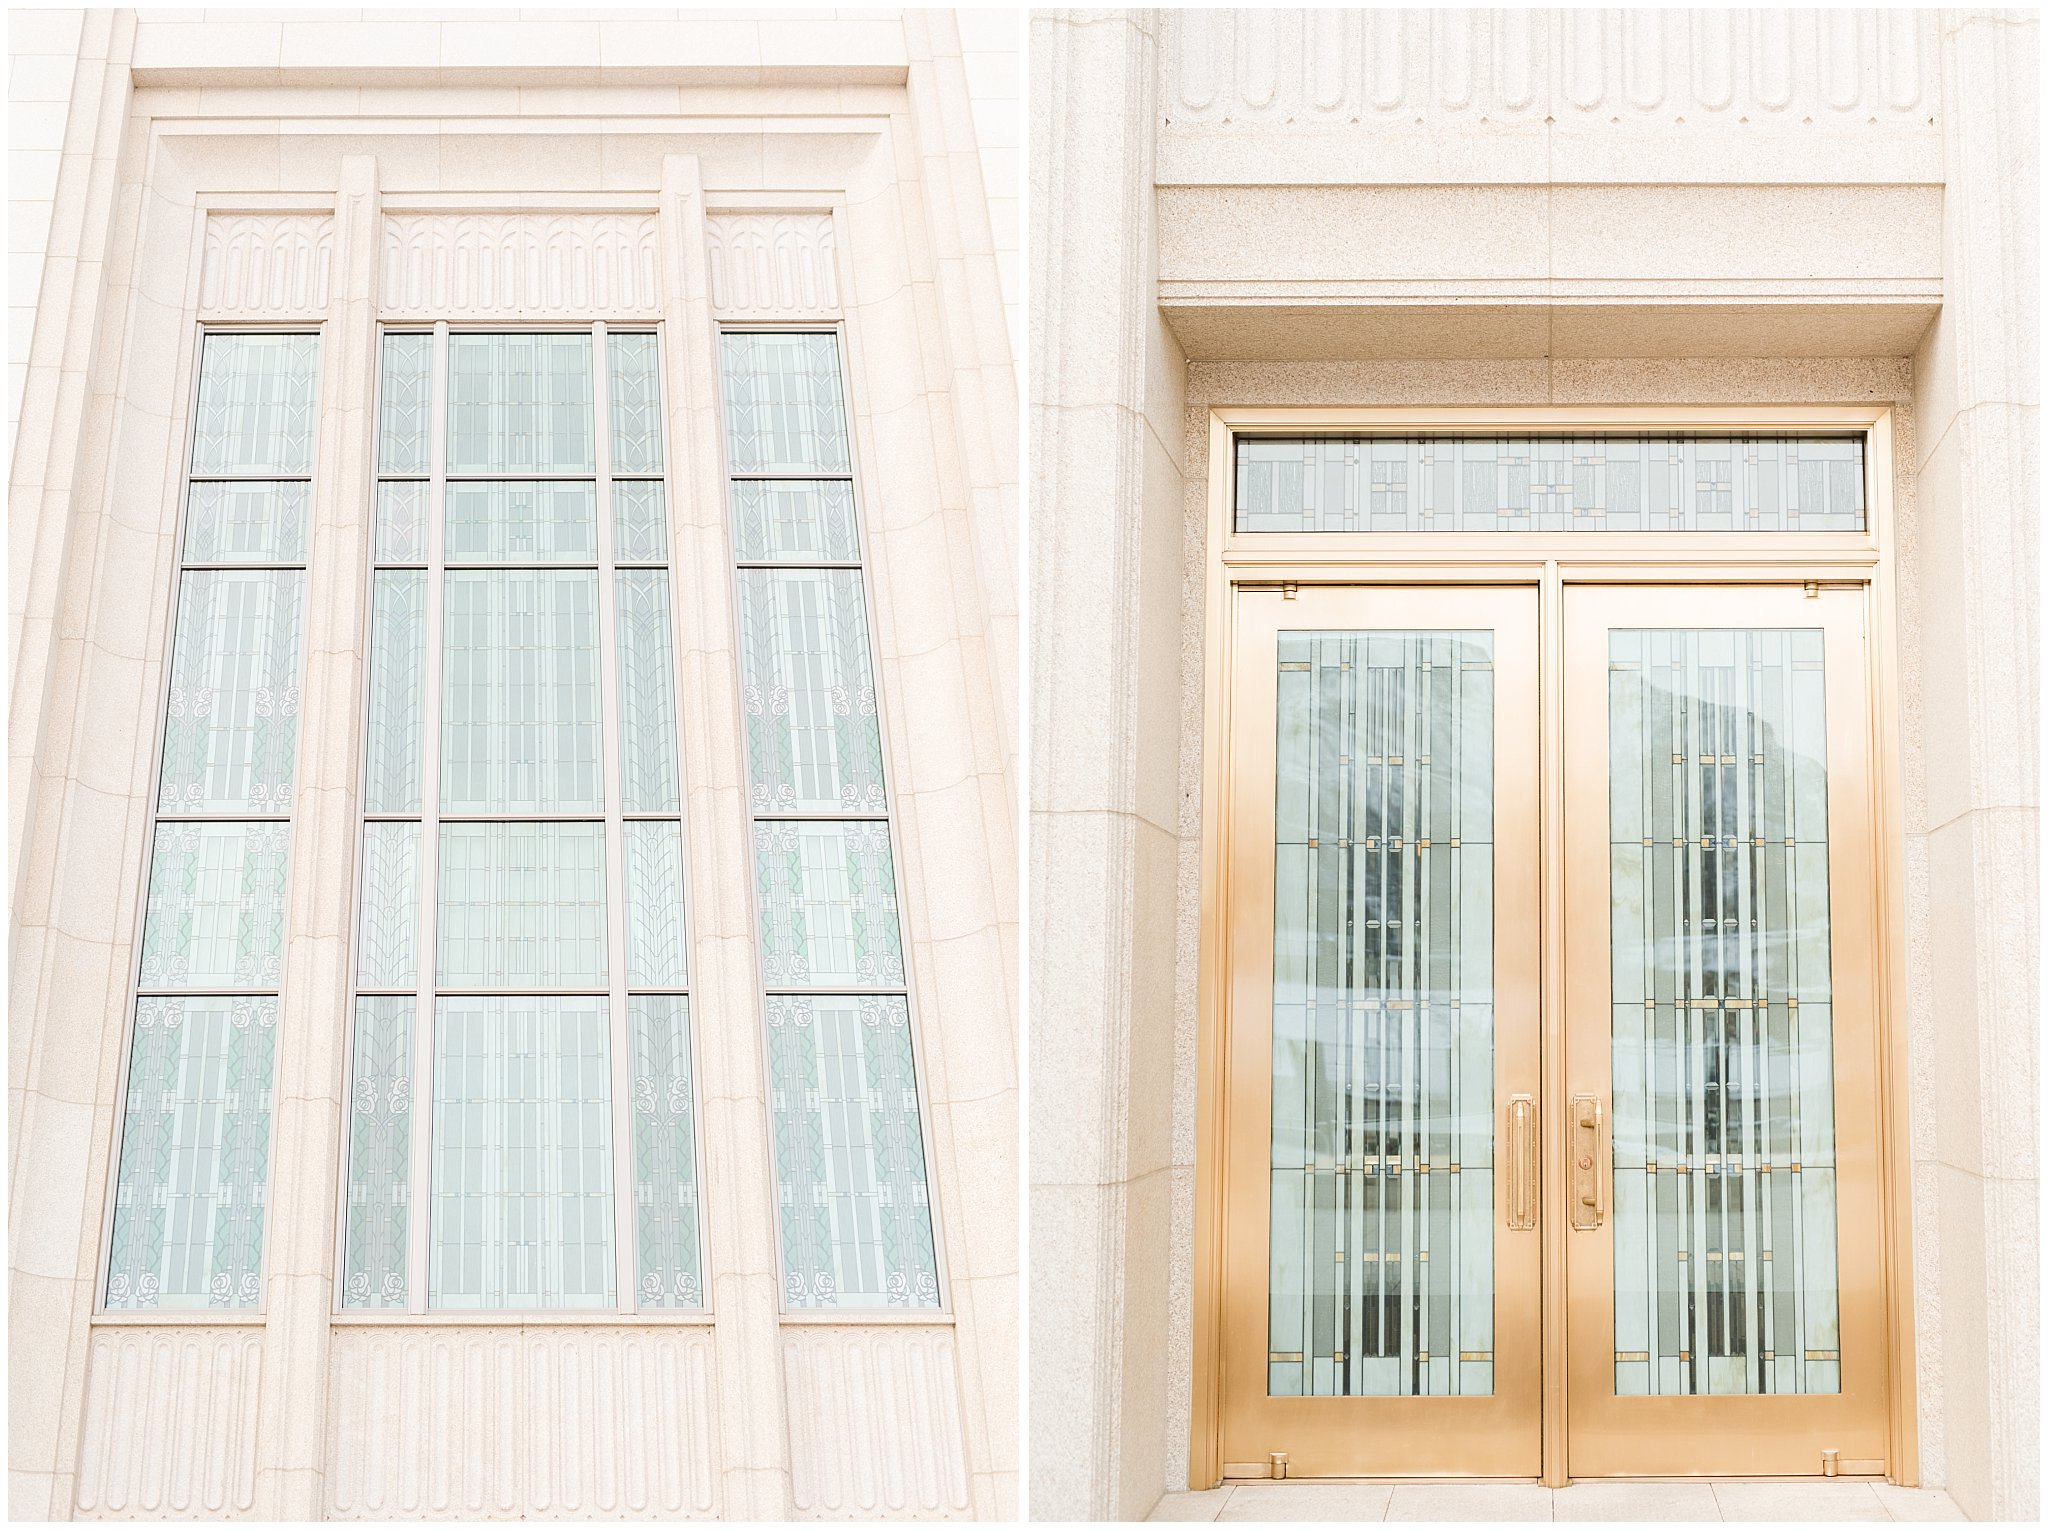 Ogden Temple details in the winter | Ogden Temple and Sweet Magnolia Wedding | Jessie and Dallin Photography